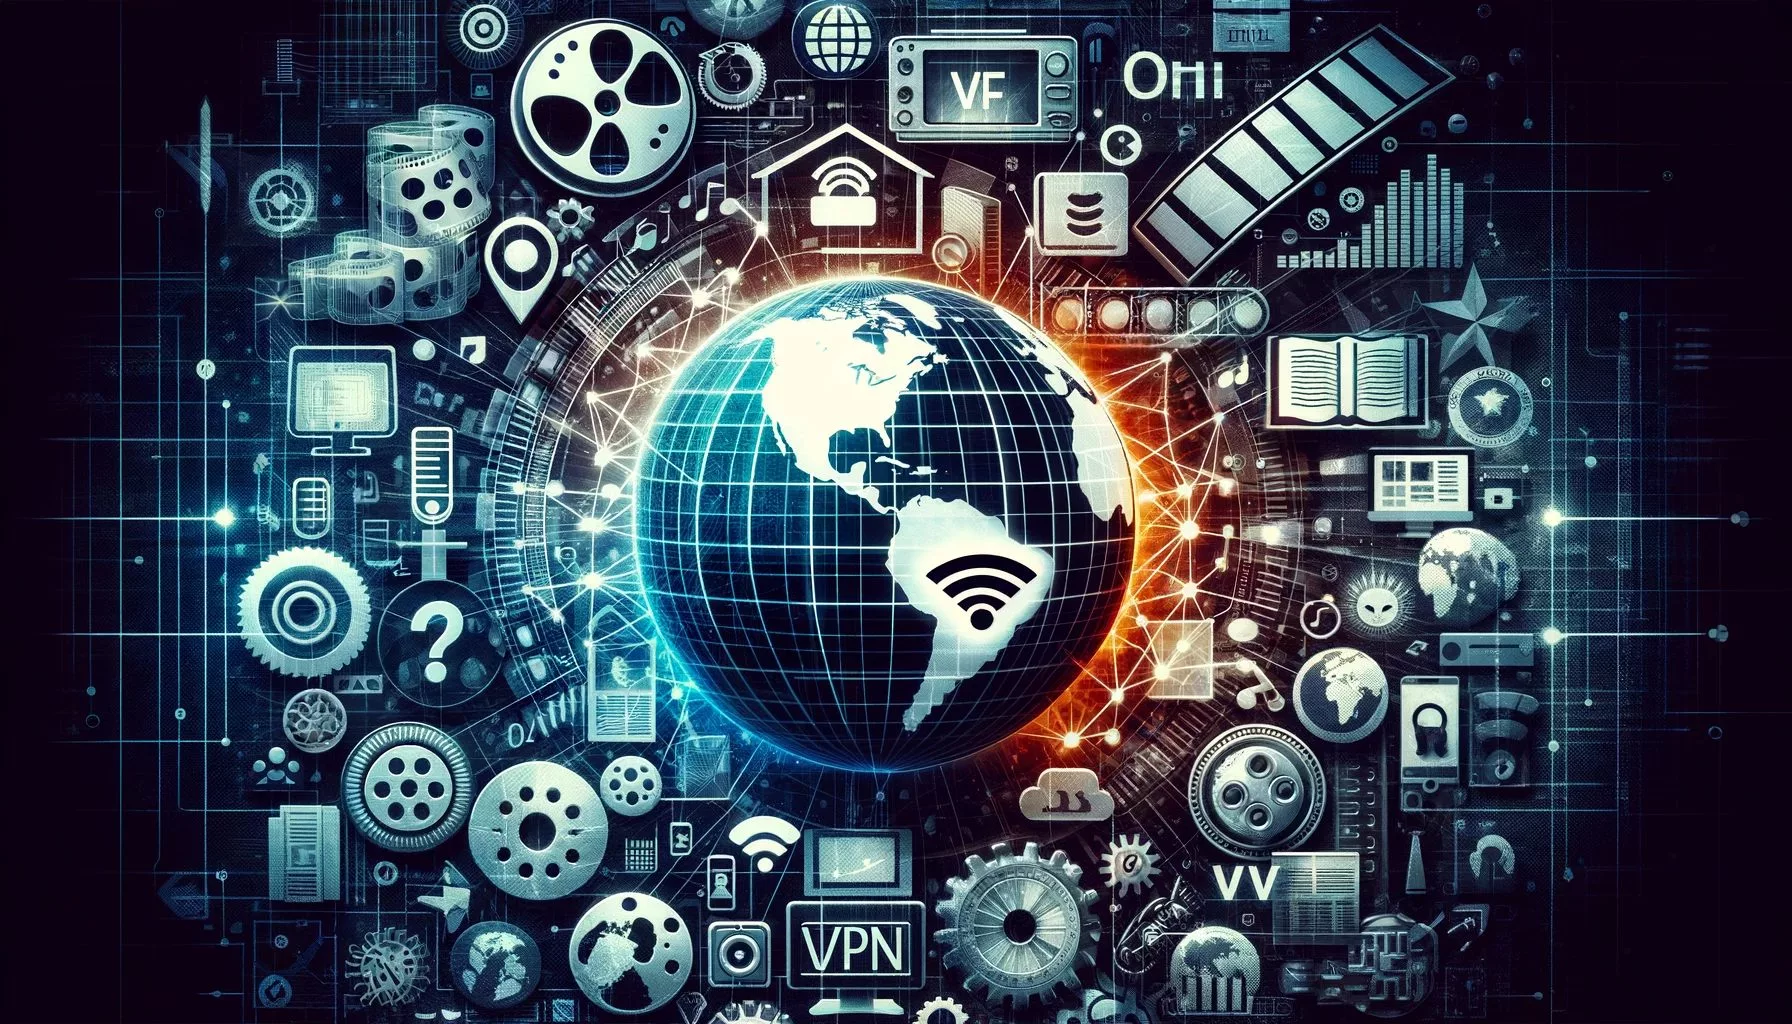 Using a VPN to overcome location content restrictions on streaming